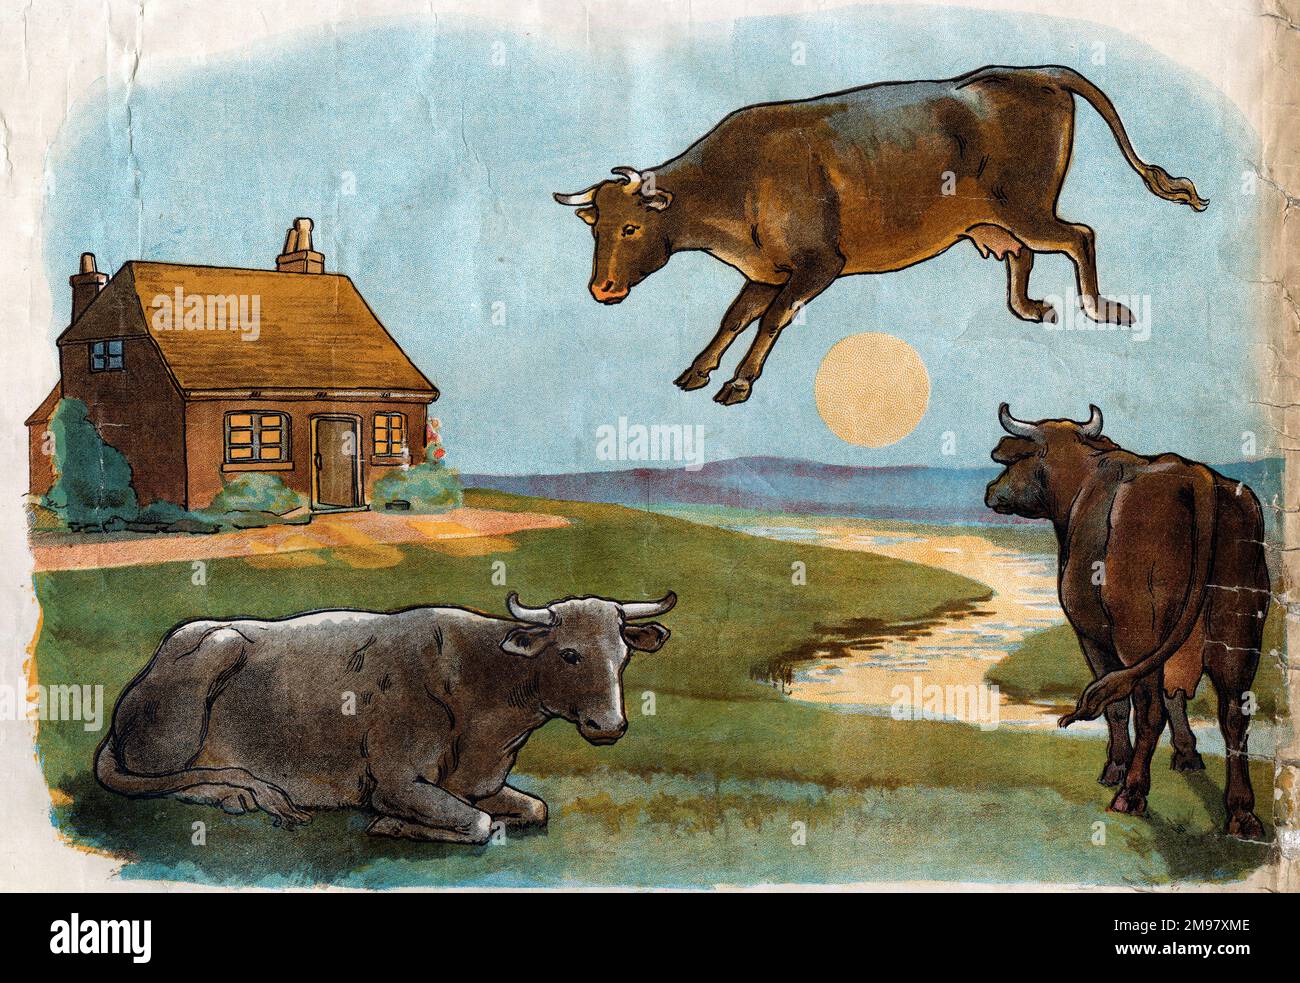 Illustration, Hey Diddle Diddle ... the cow jumped over the moon.  (2 of 4) Stock Photo